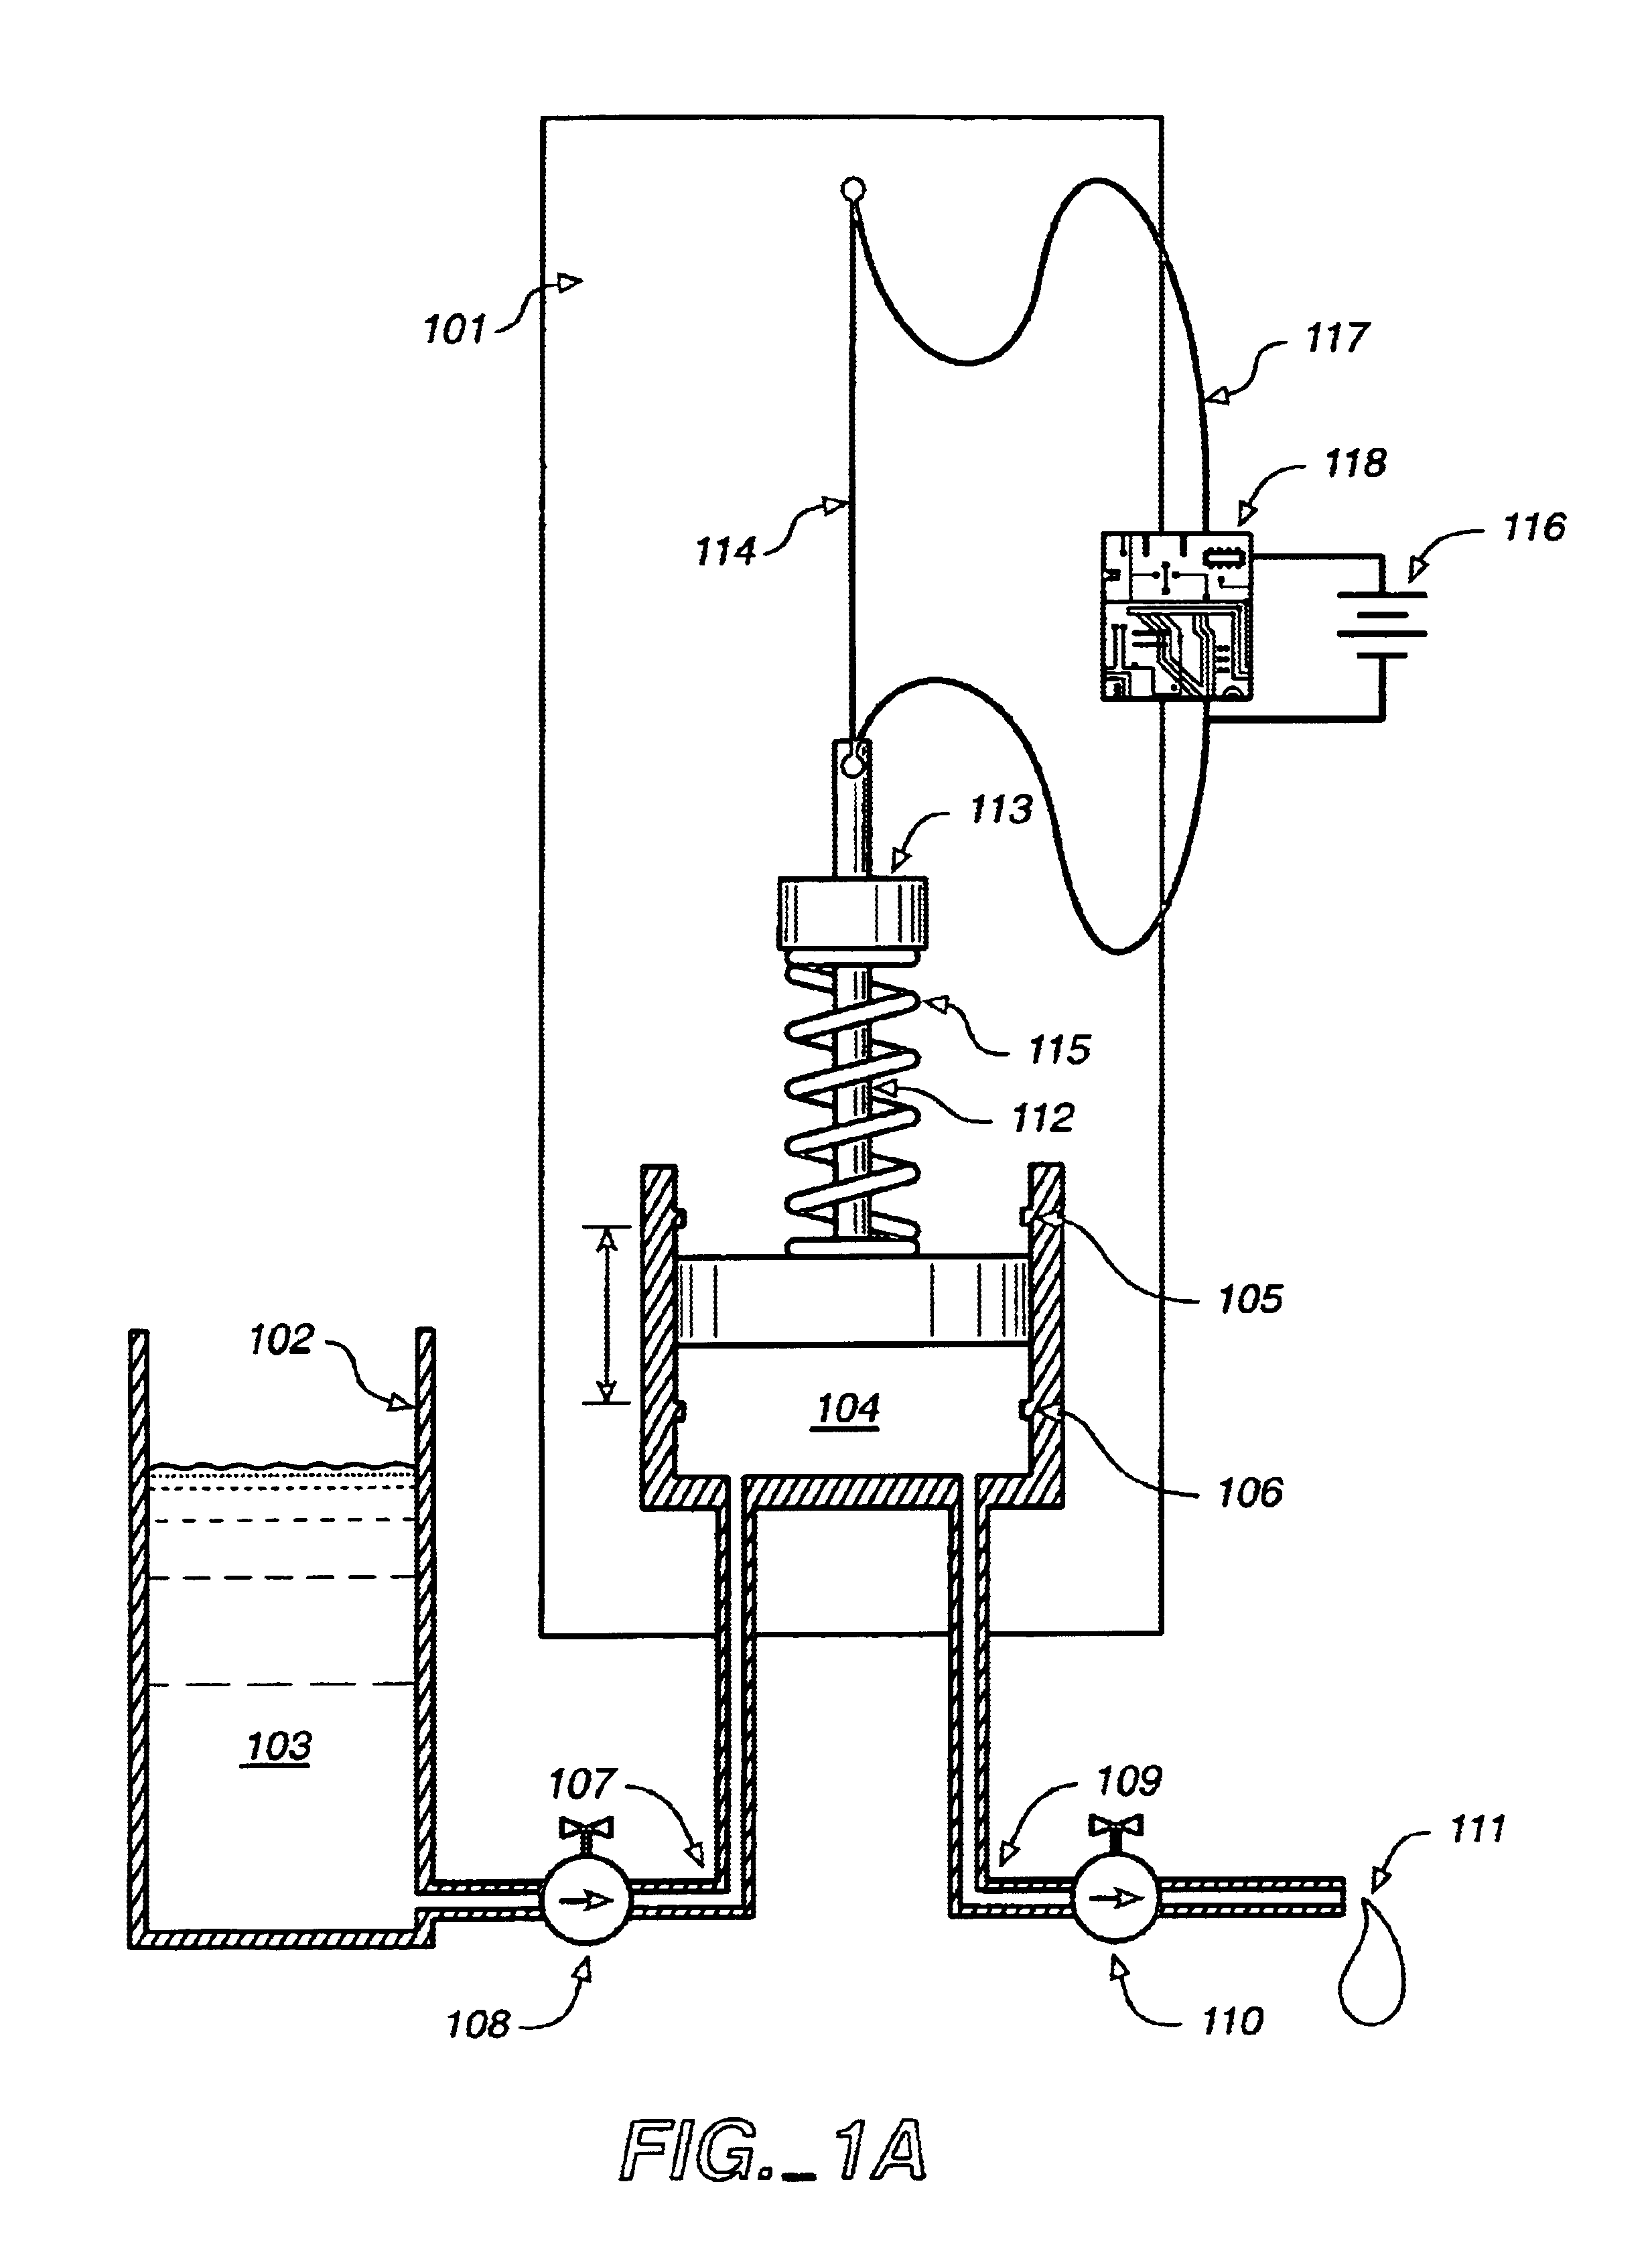 Device and method employing shape memory alloy